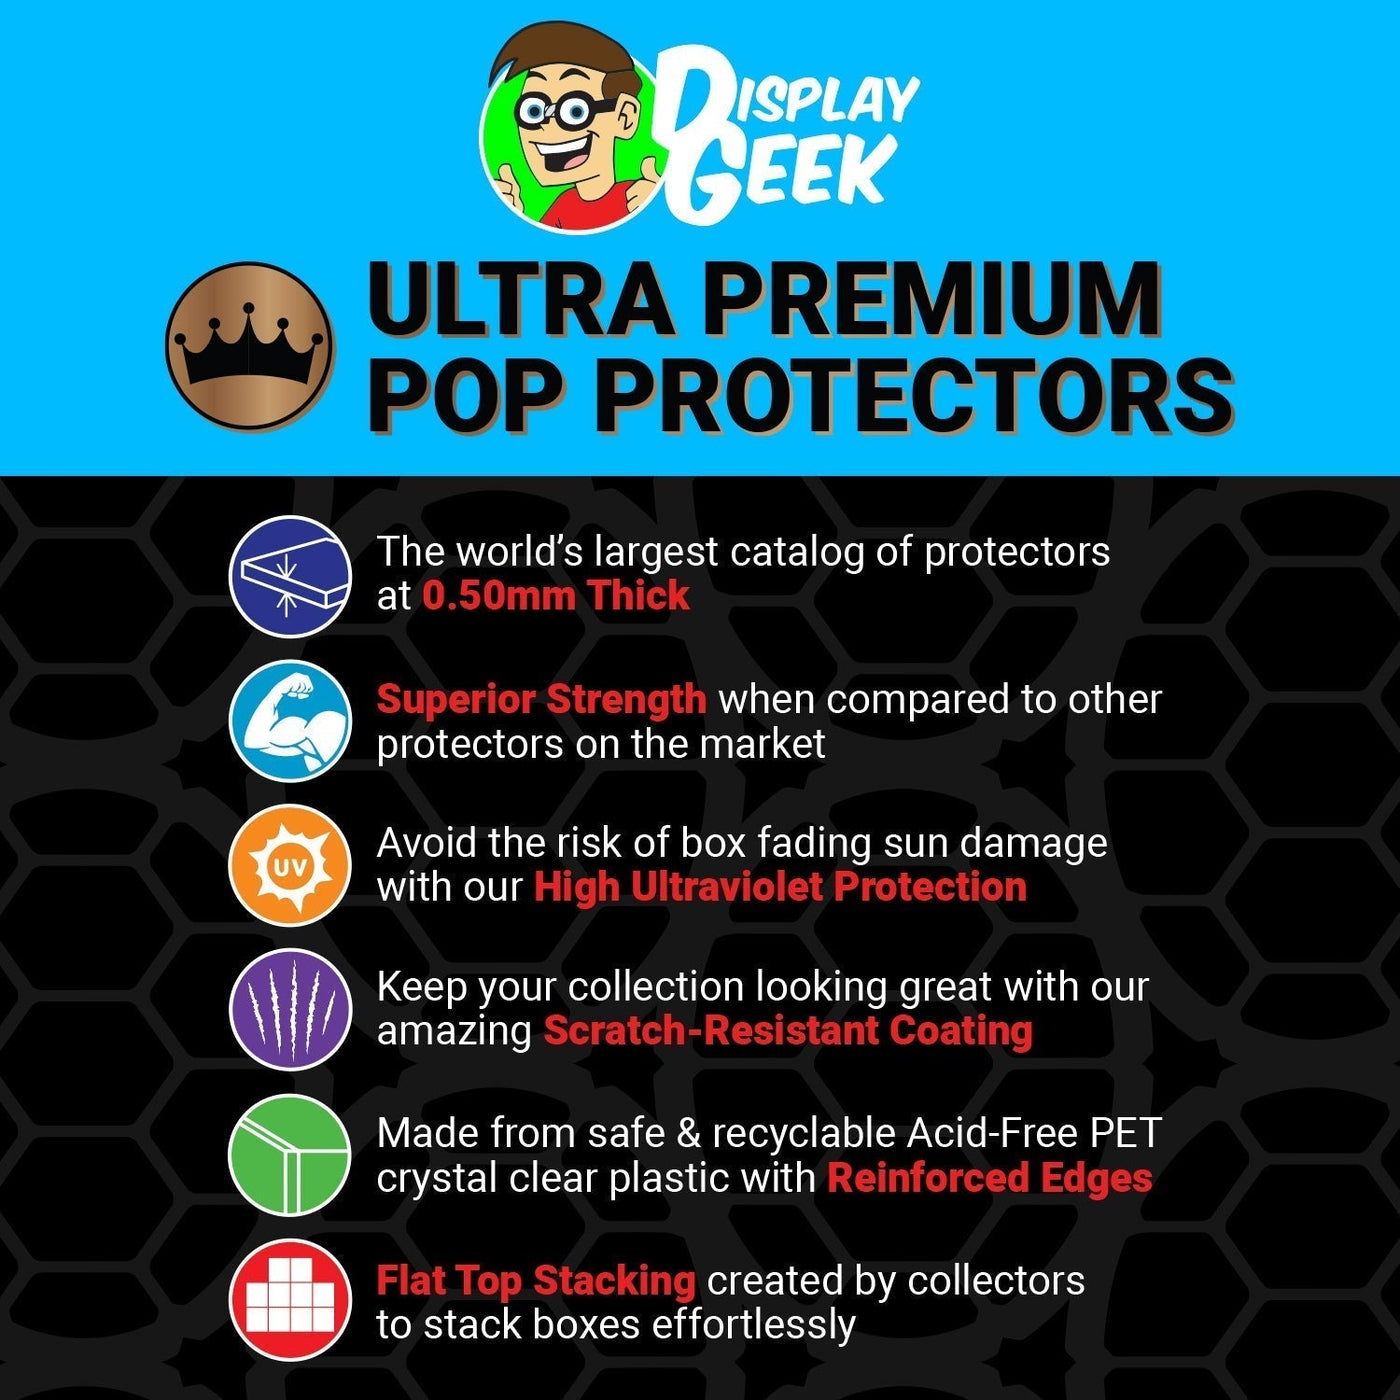 Pop Protector for 6 inch Giant Lady Matte Black #99 Super Funko Pop on The Protector Guide App by Display Geek